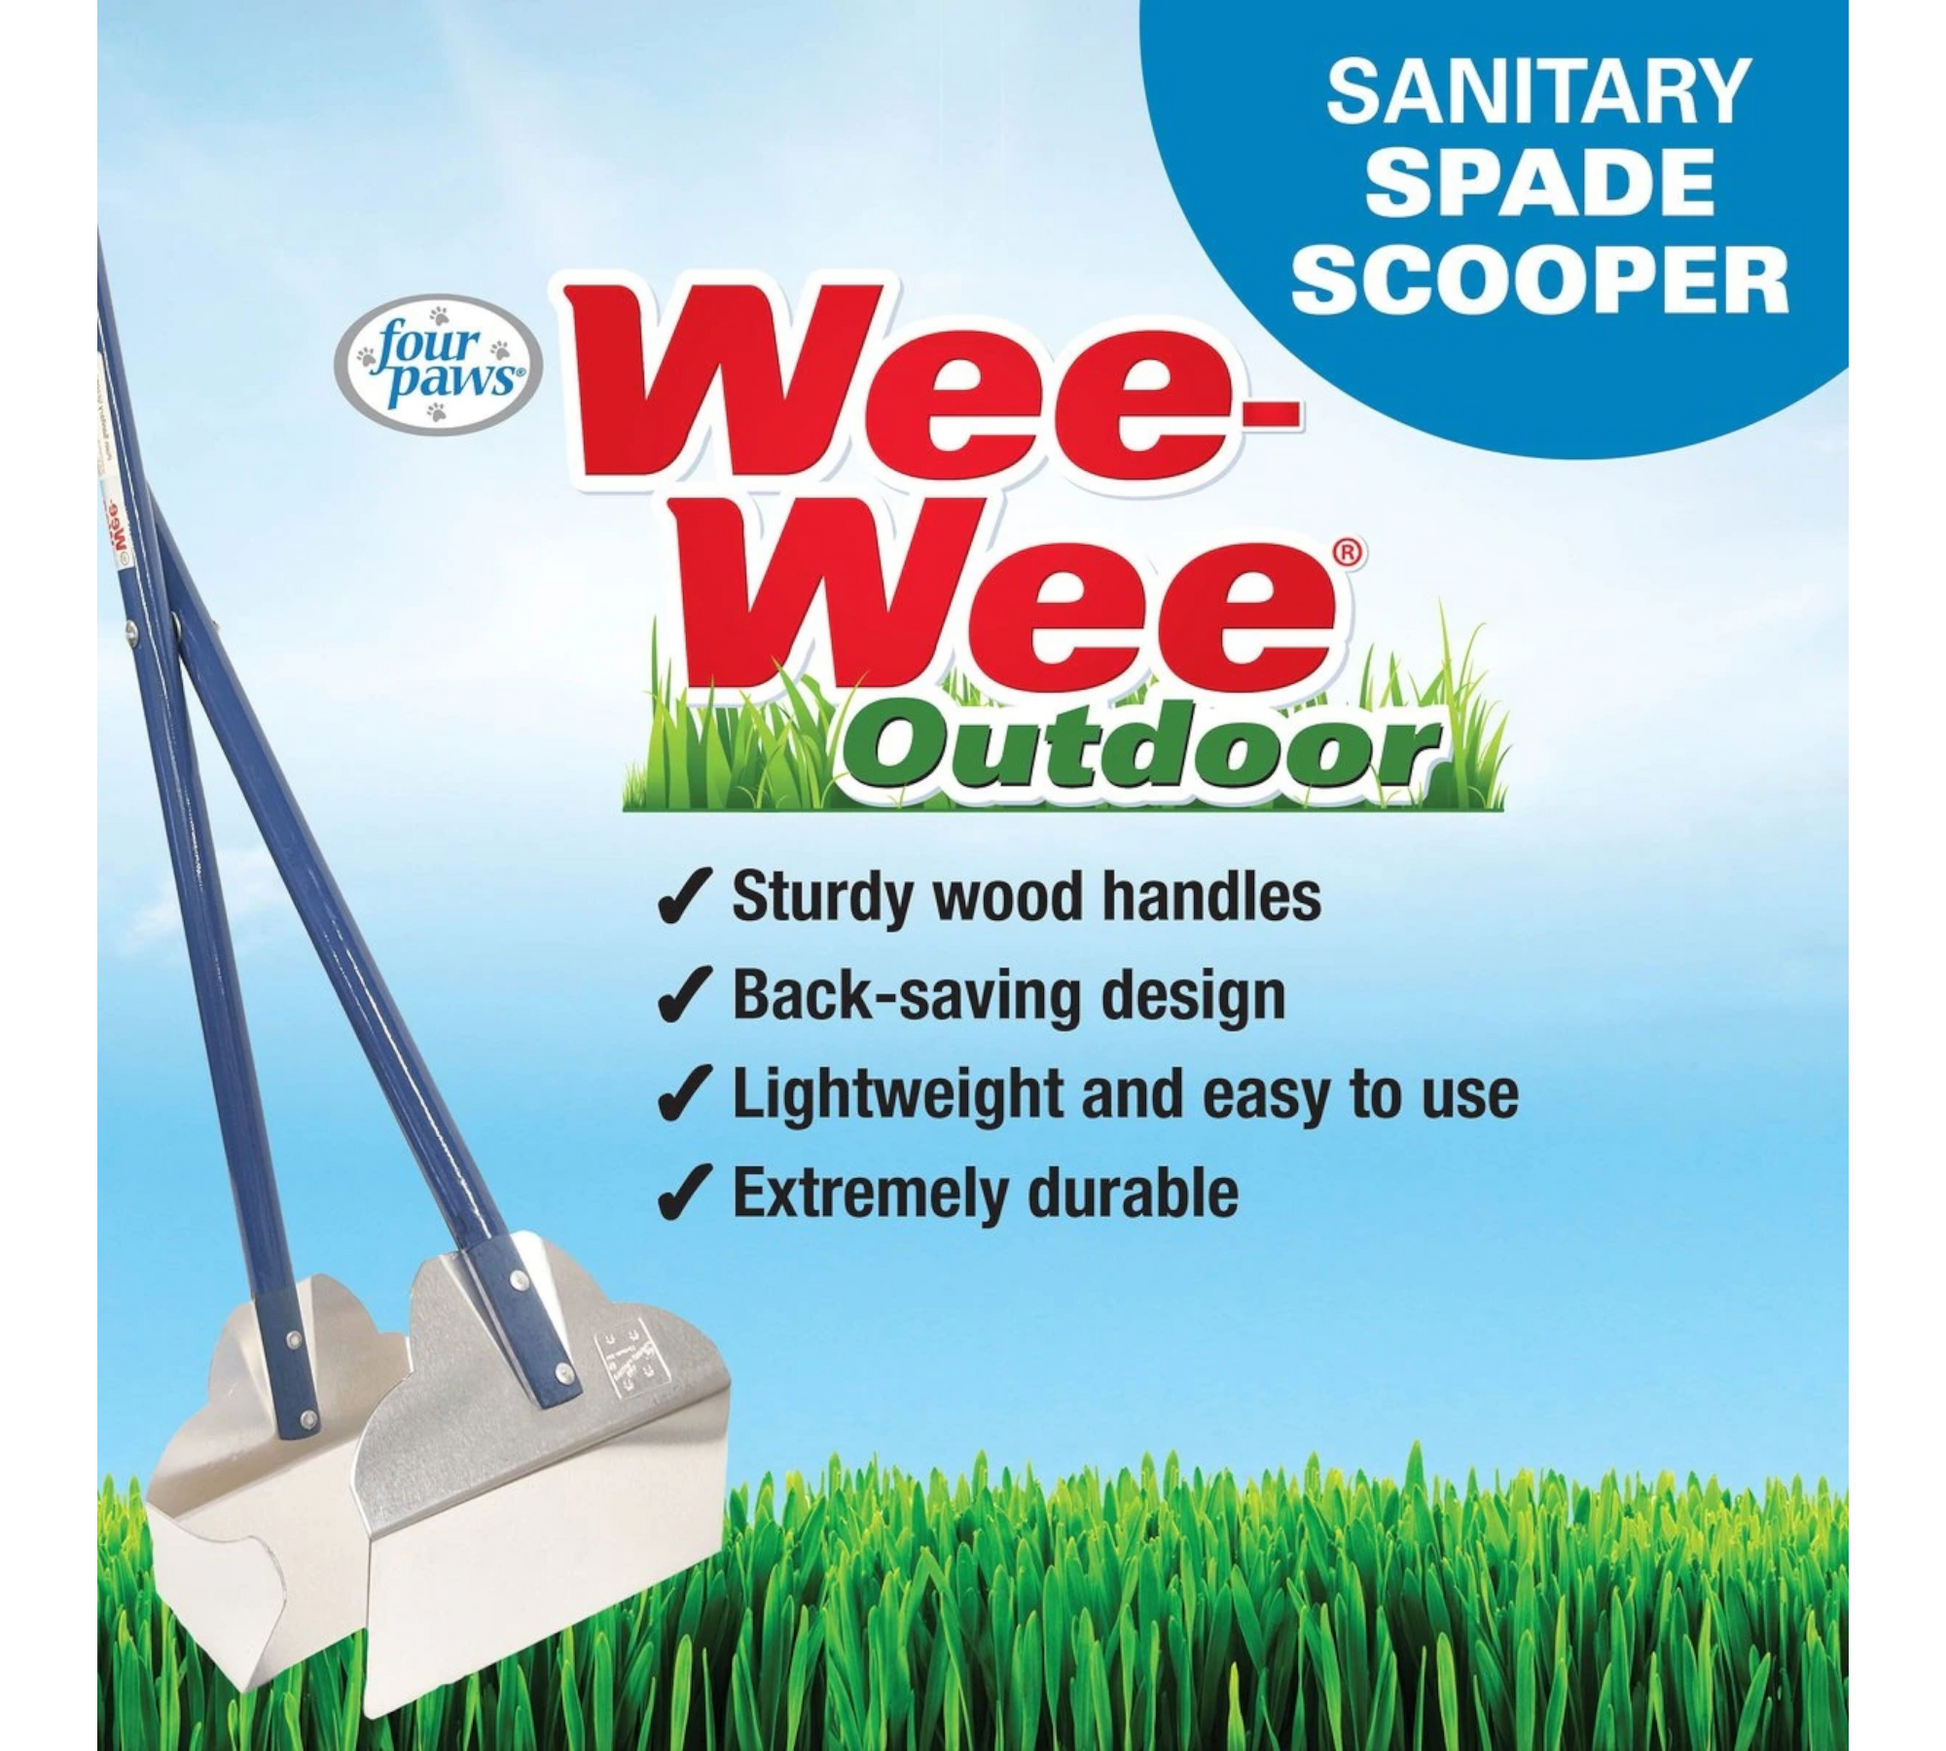 Canine's World Poop scoopers Wee-Wee Sanitary Pooper Scooper Four Paws